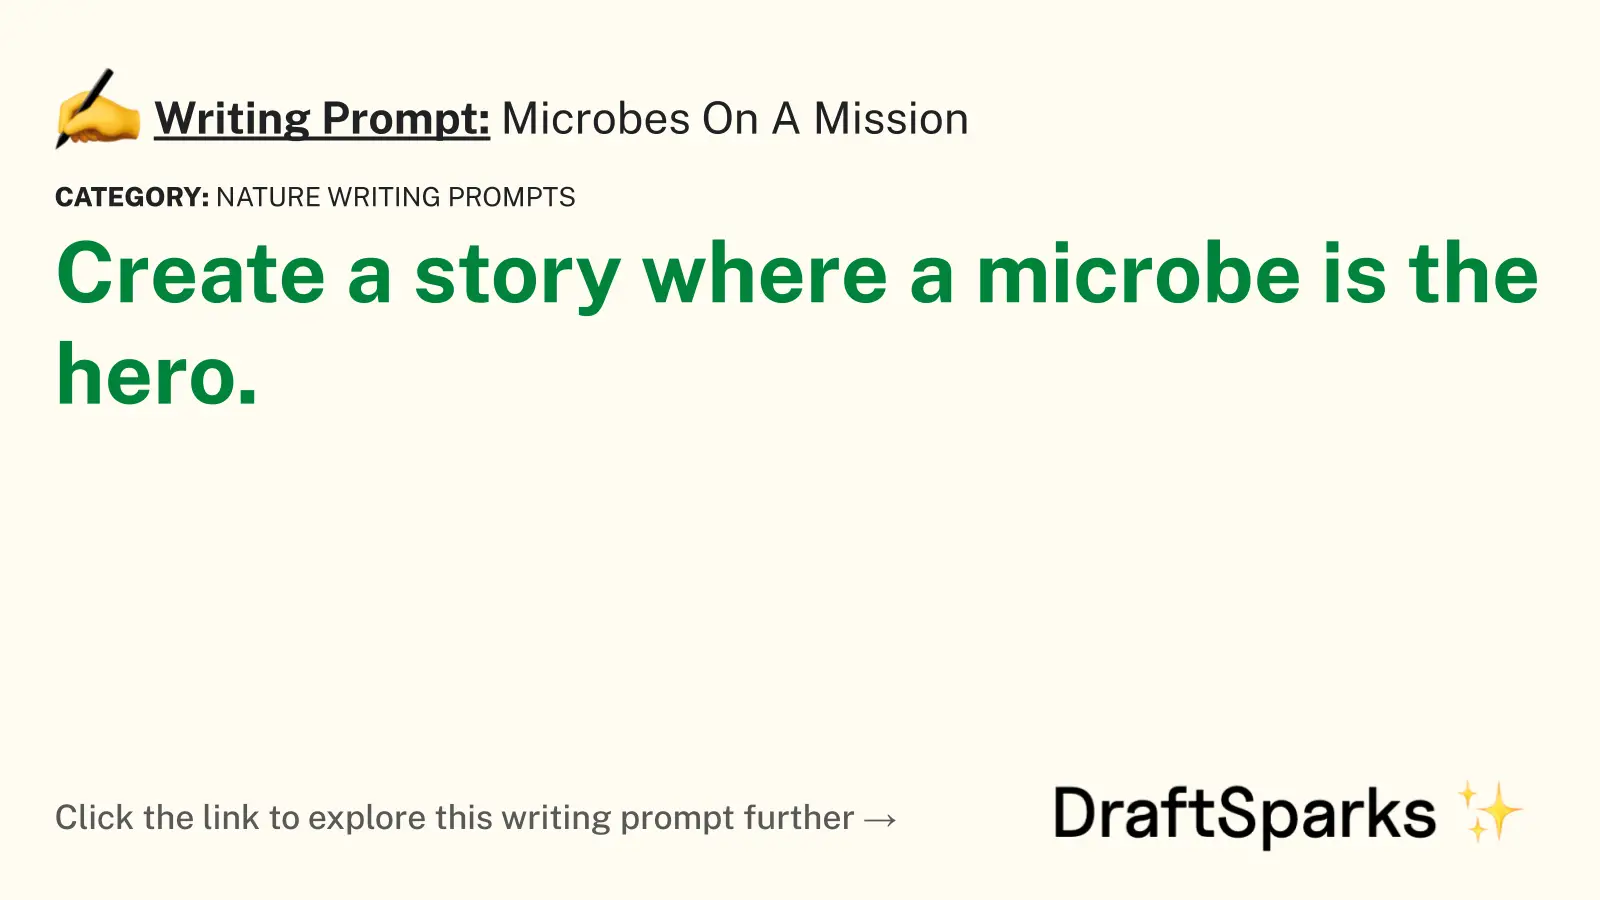 Microbes On A Mission